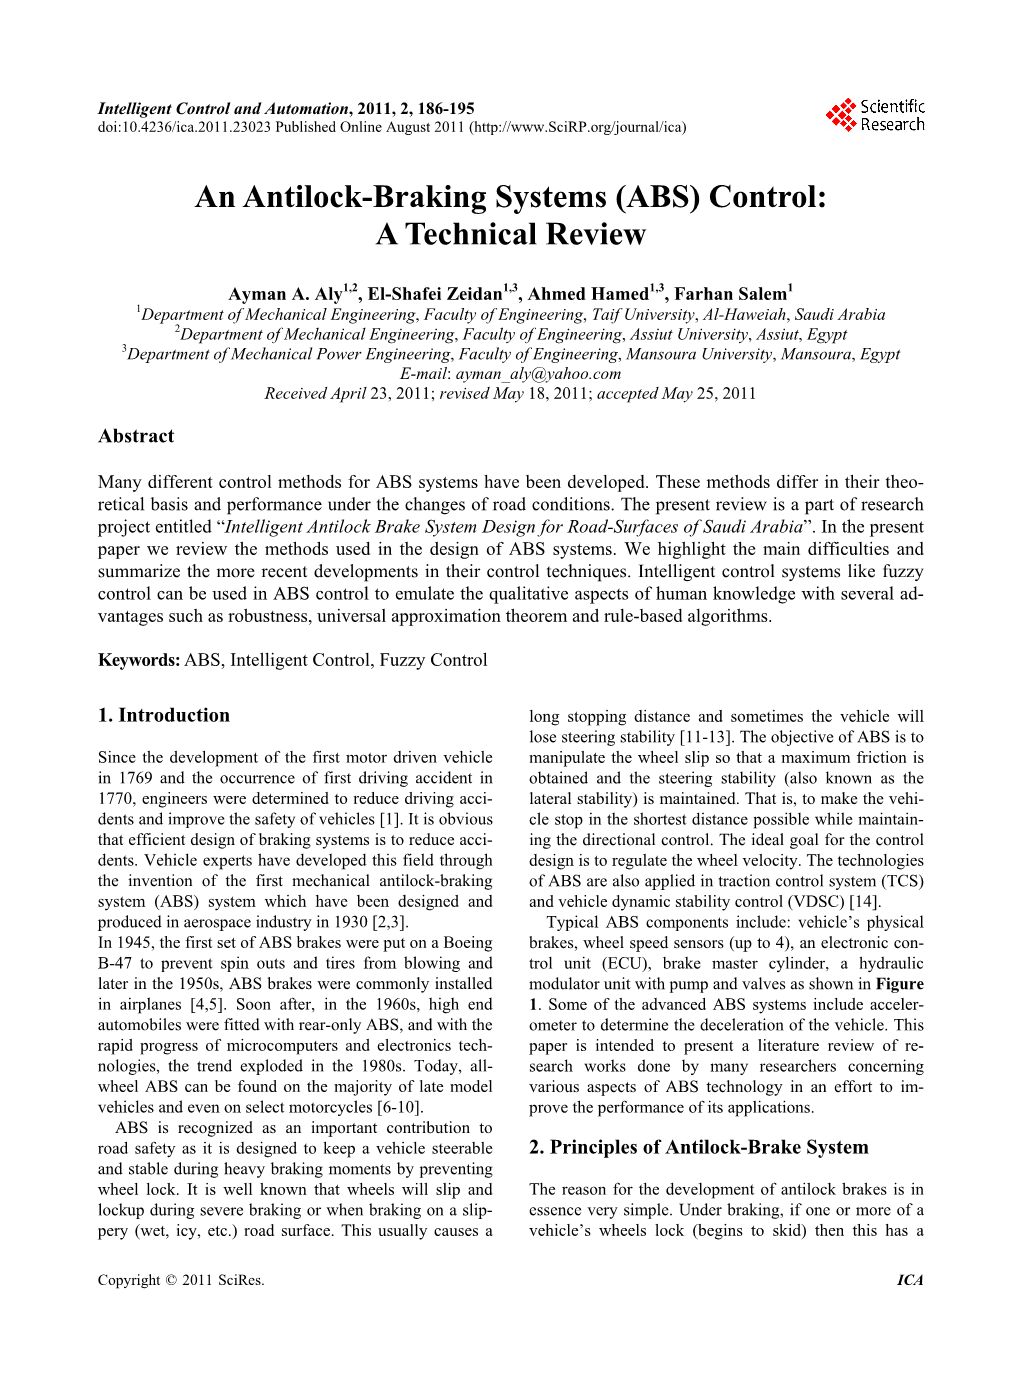 An Antilock-Braking Systems (ABS) Control: a Technical Review